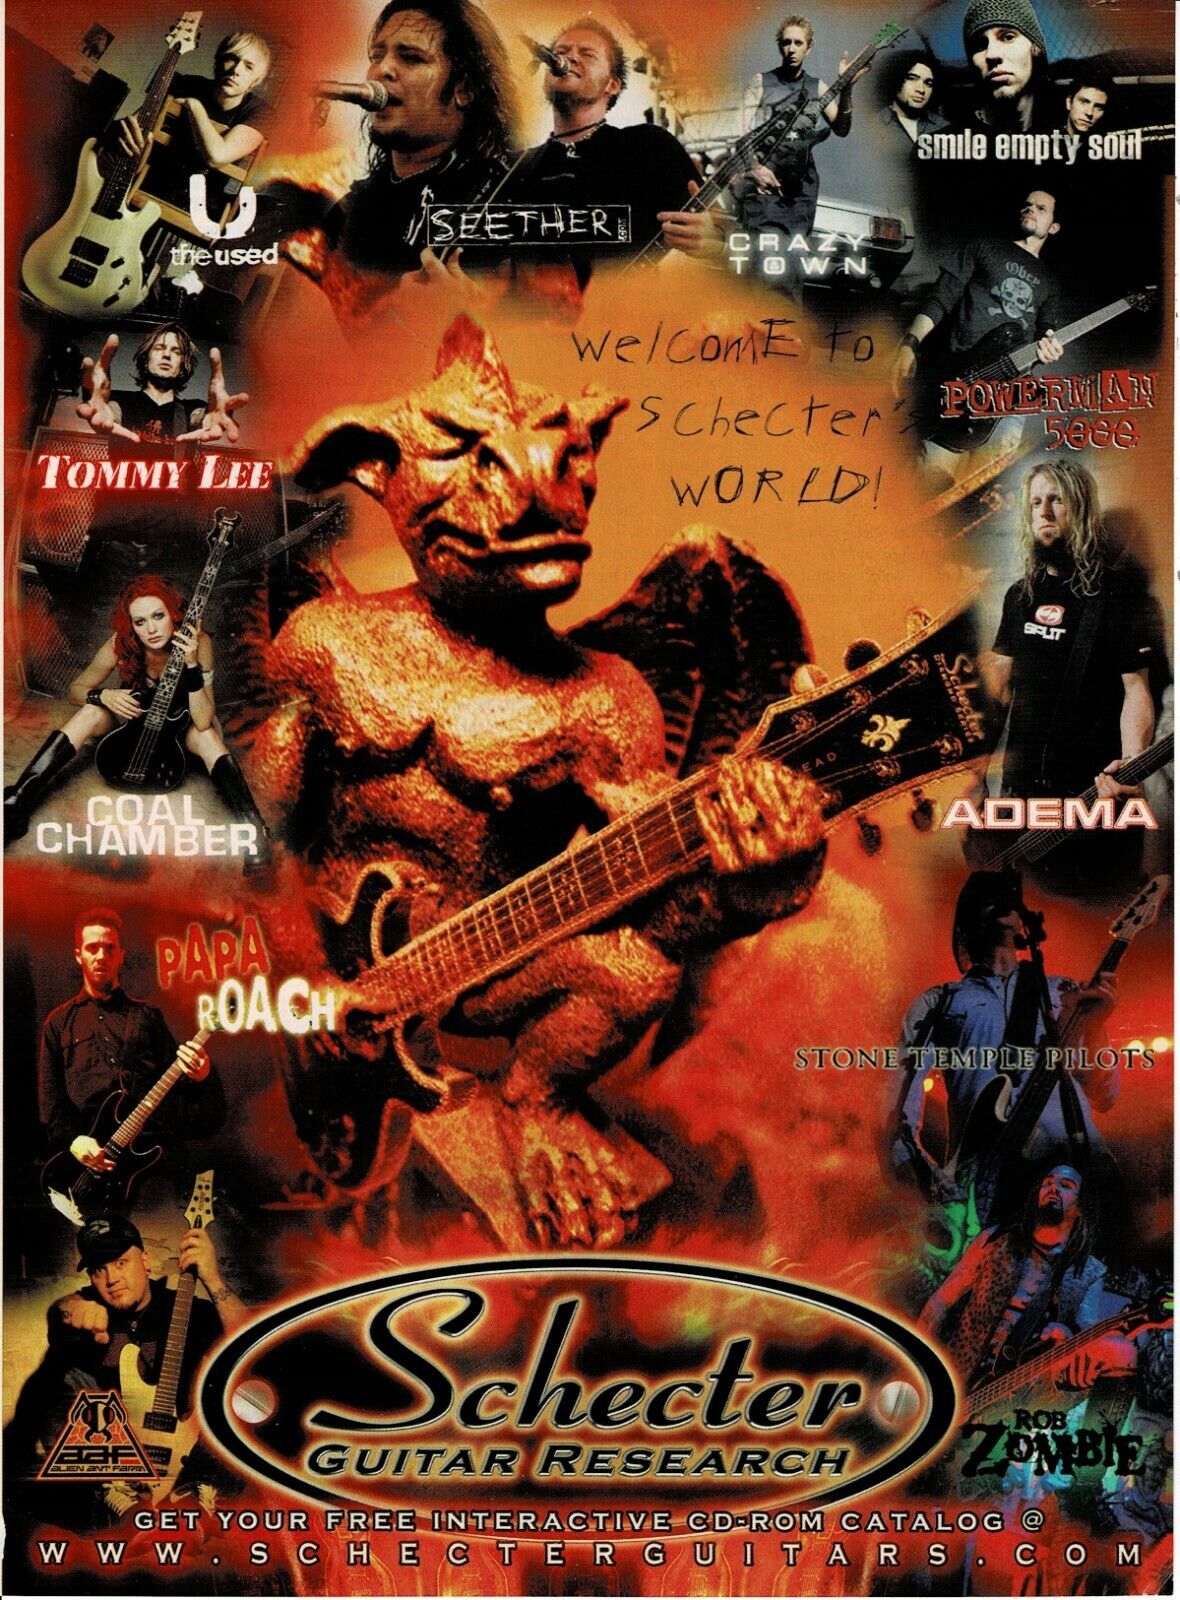 Schecter Guitar Research - Seether / Papa Roach / Adema / AAF - 2003 Print Ad